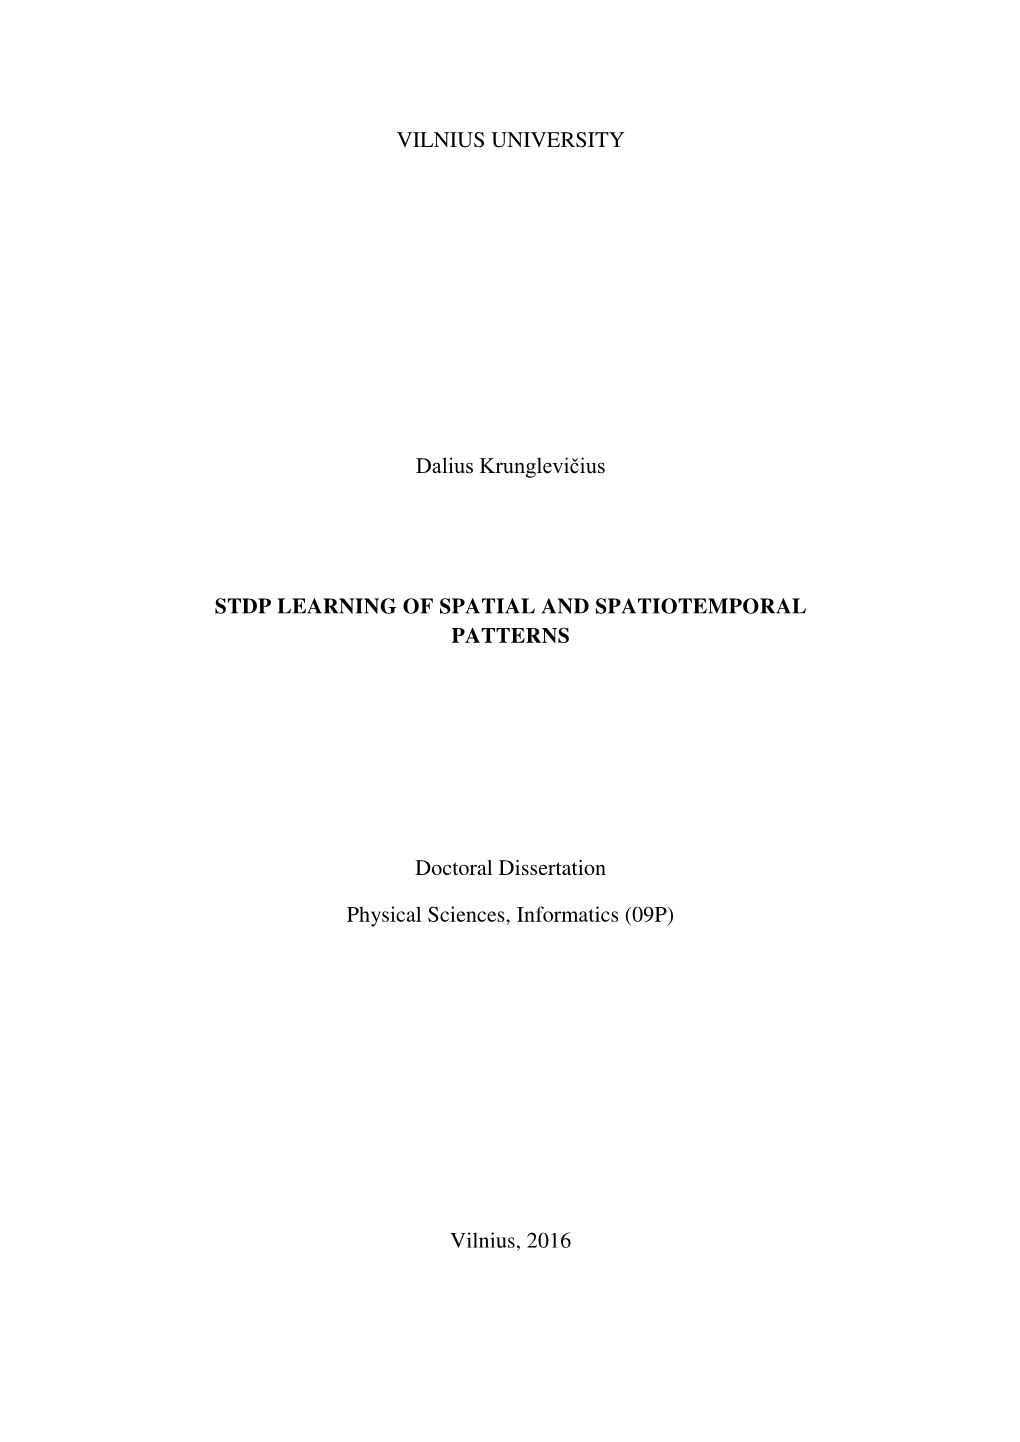 VILNIUS UNIVERSITY Dalius Krunglevičius STDP LEARNING of SPATIAL and SPATIOTEMPORAL PATTERNS Doctoral Dissertation Physical